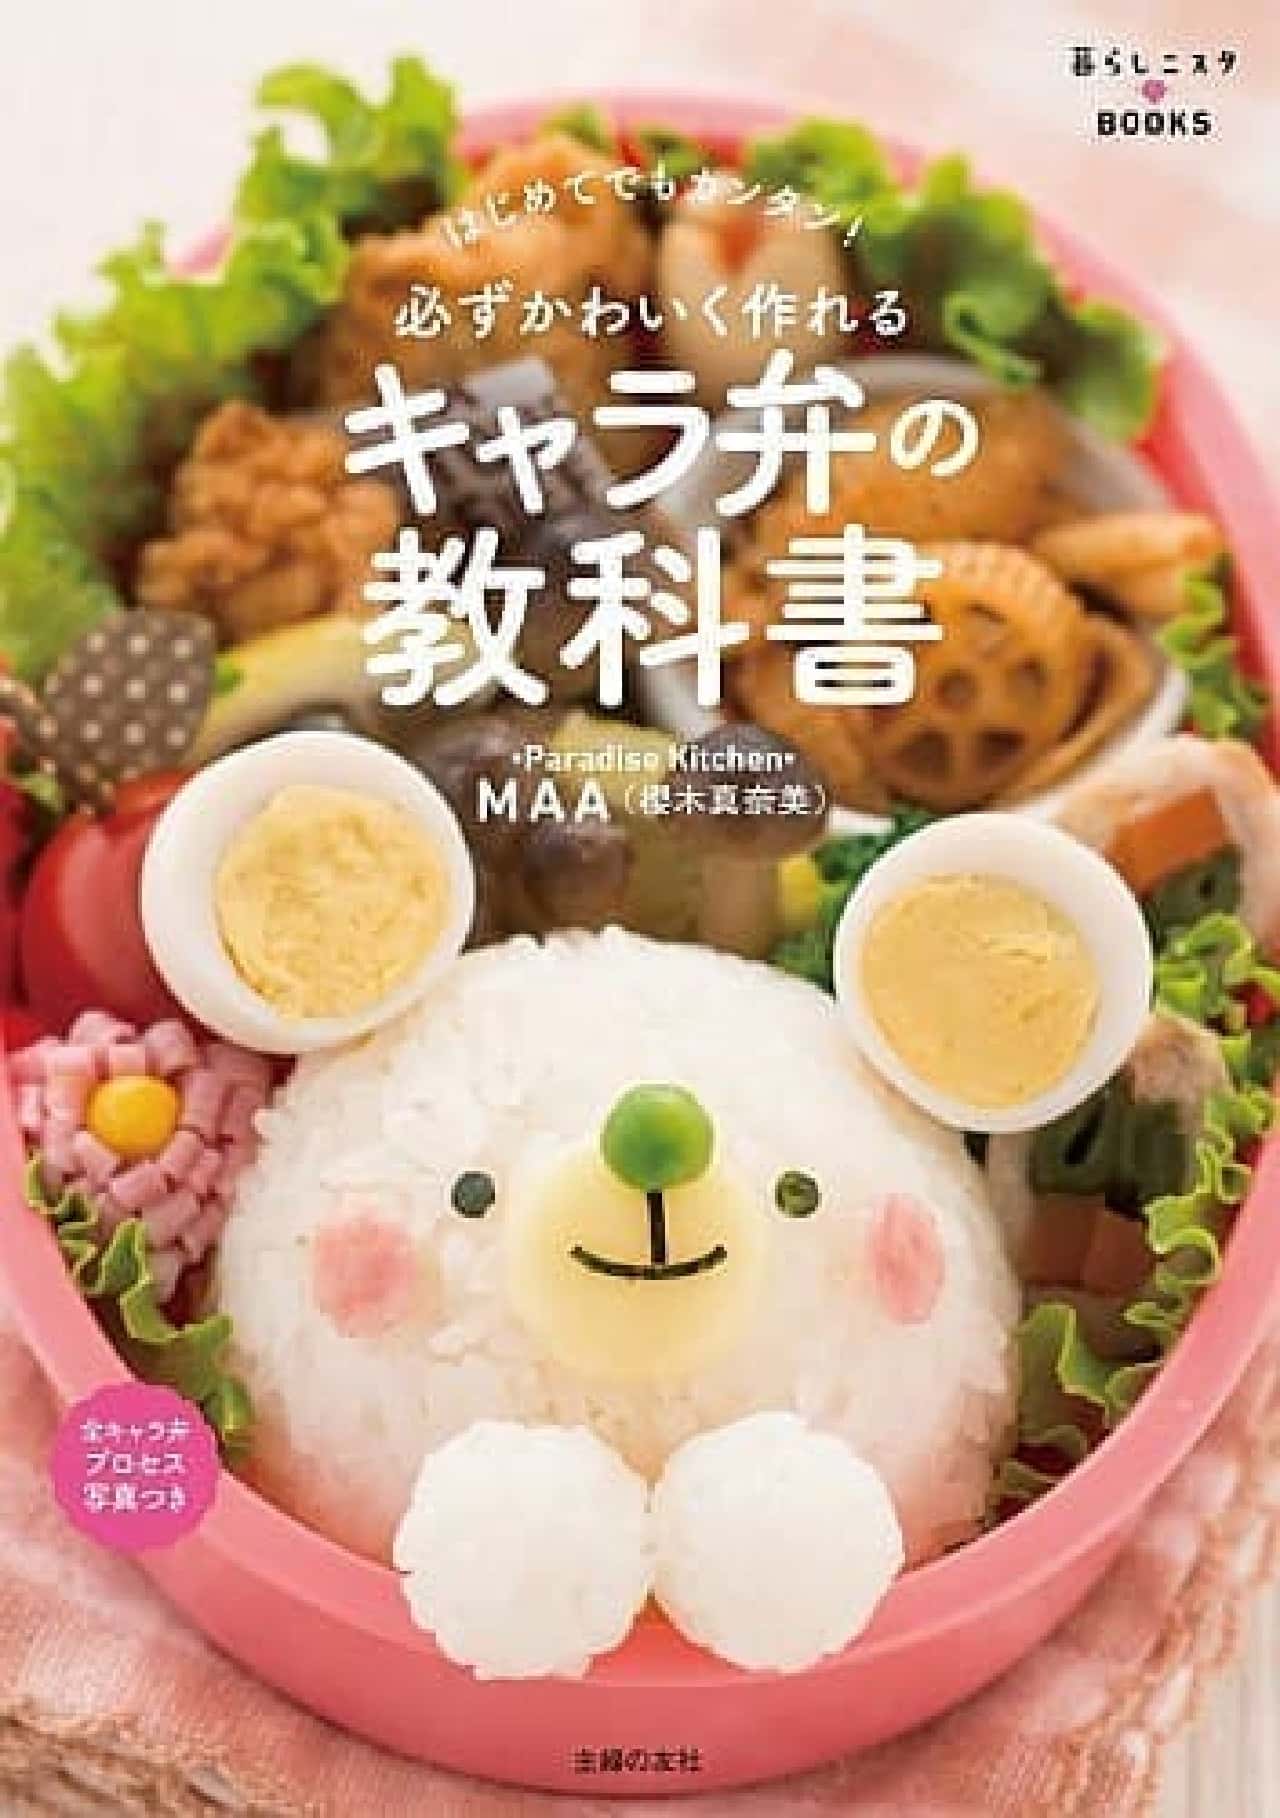 A textbook of Kyaraben that you can definitely make cute